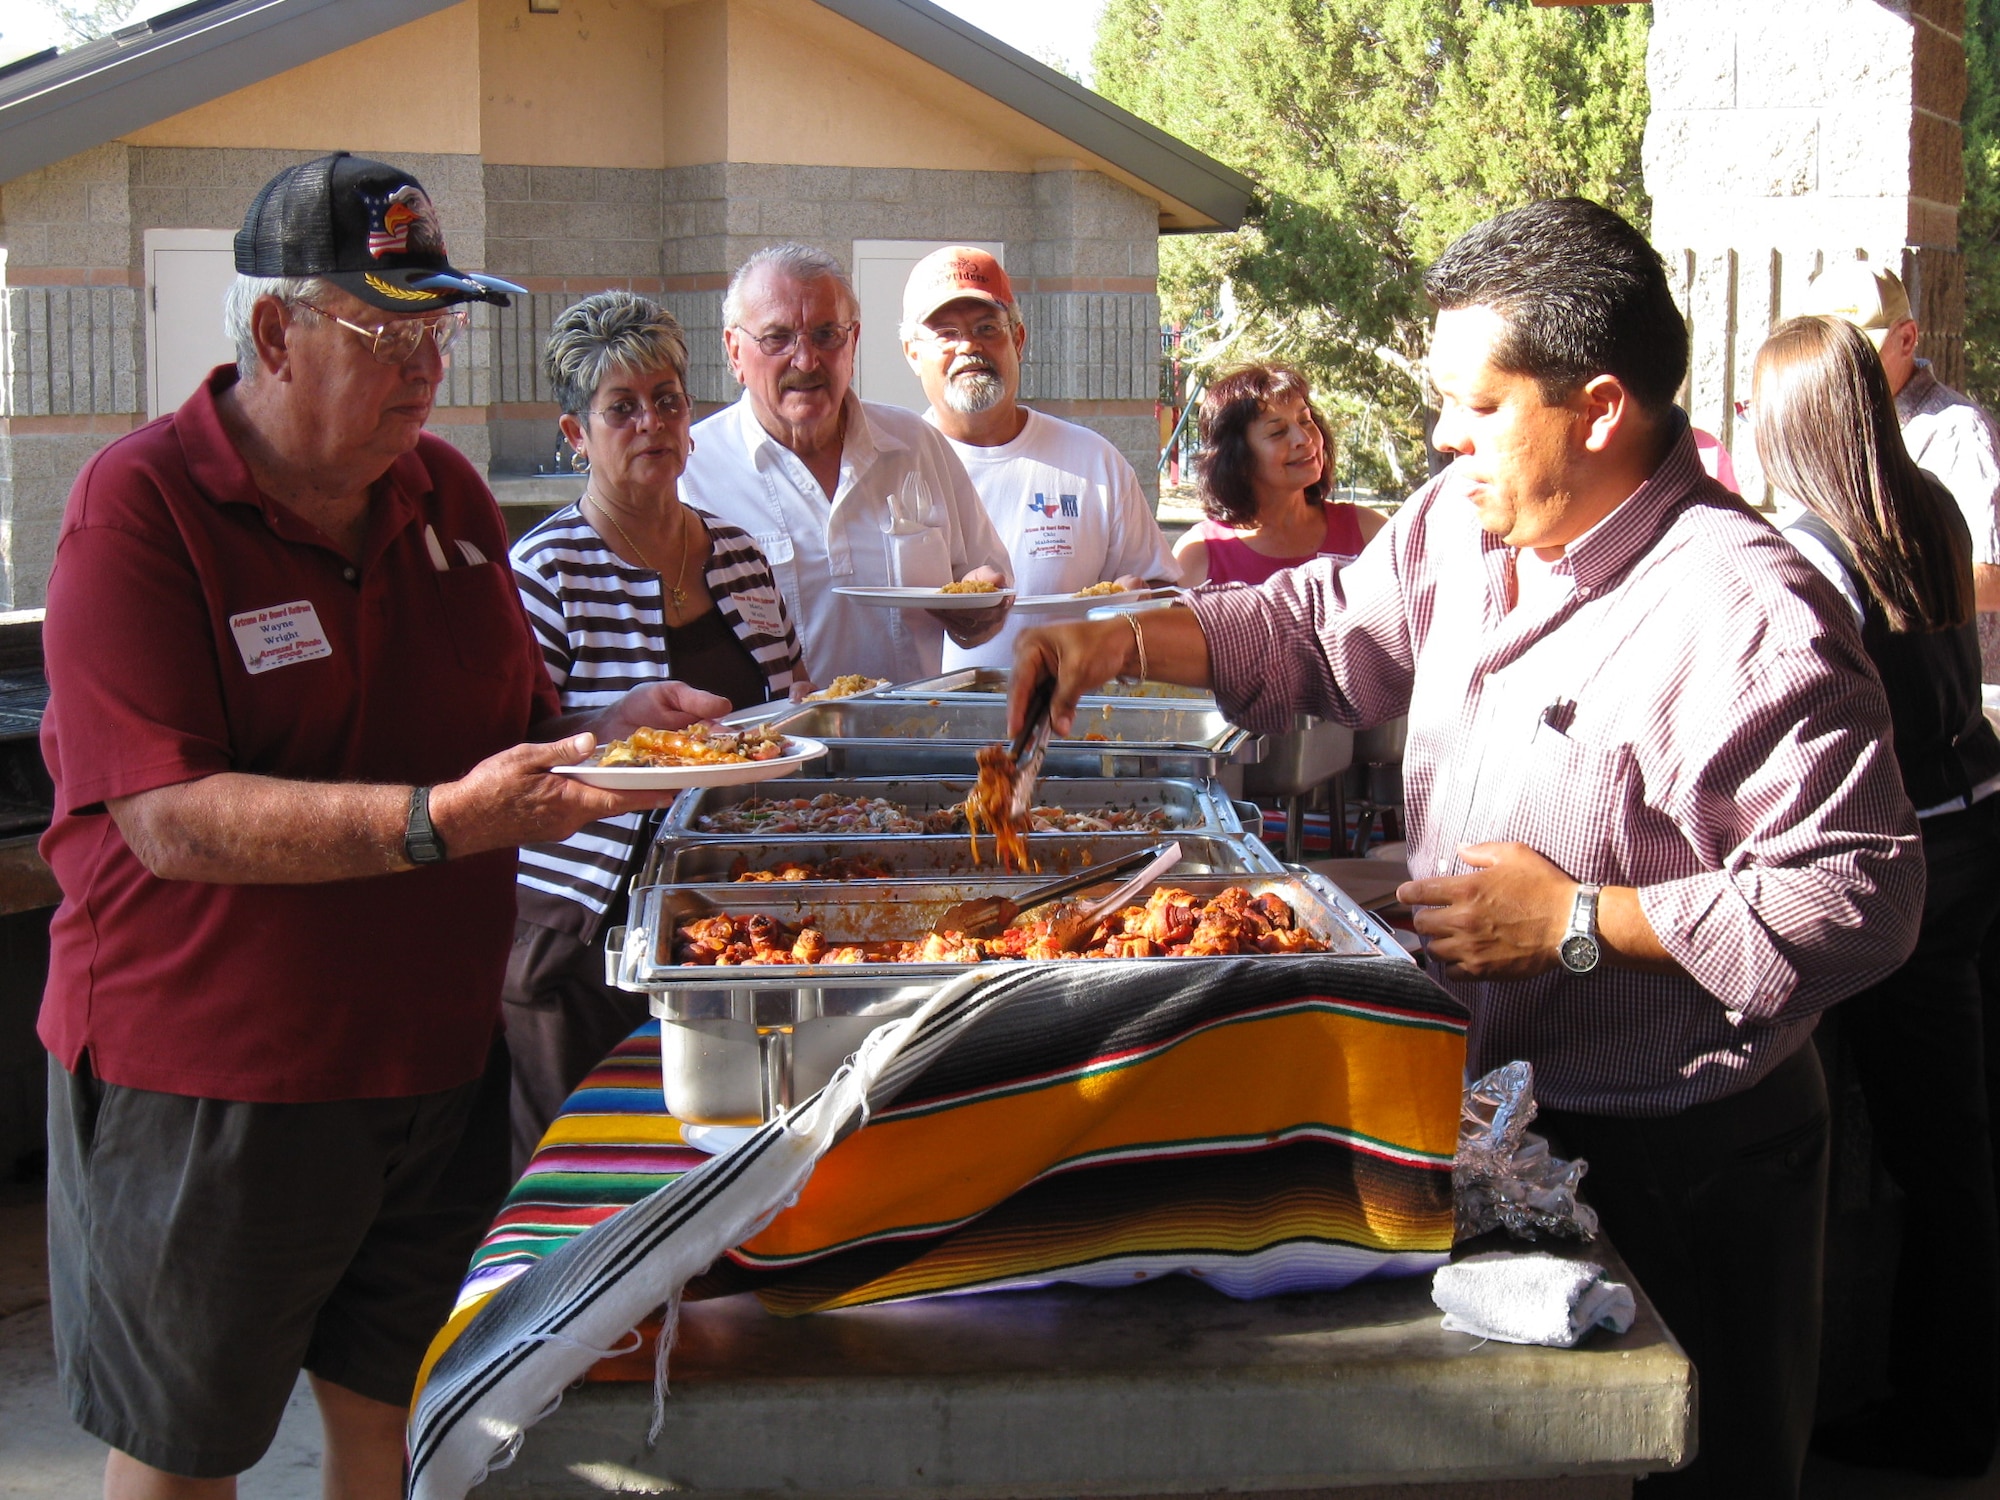 Wayne Wright, Maria and Andy Wolfel, and Frank and Betty Maldonado line up for the feast.